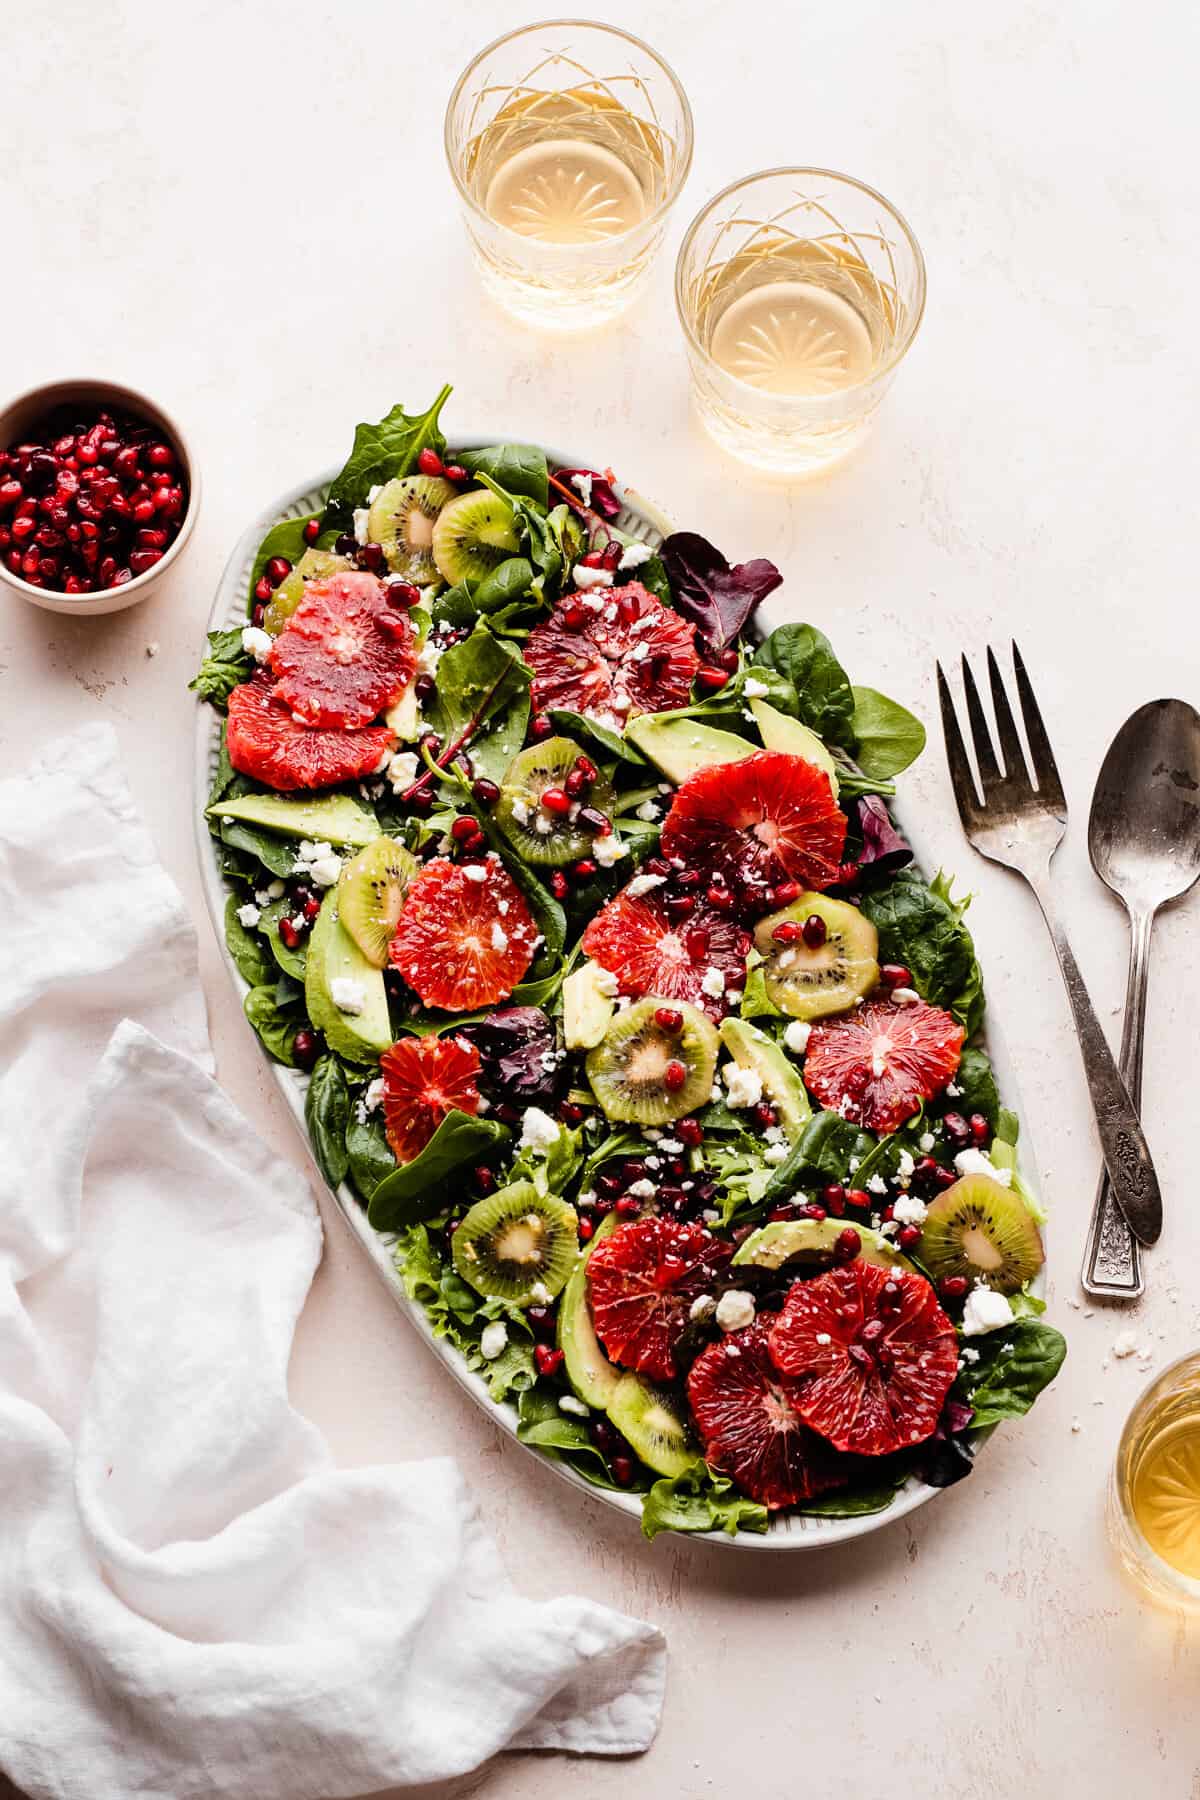 A platter of the colorful salad on a light surface, with glasses of wine.